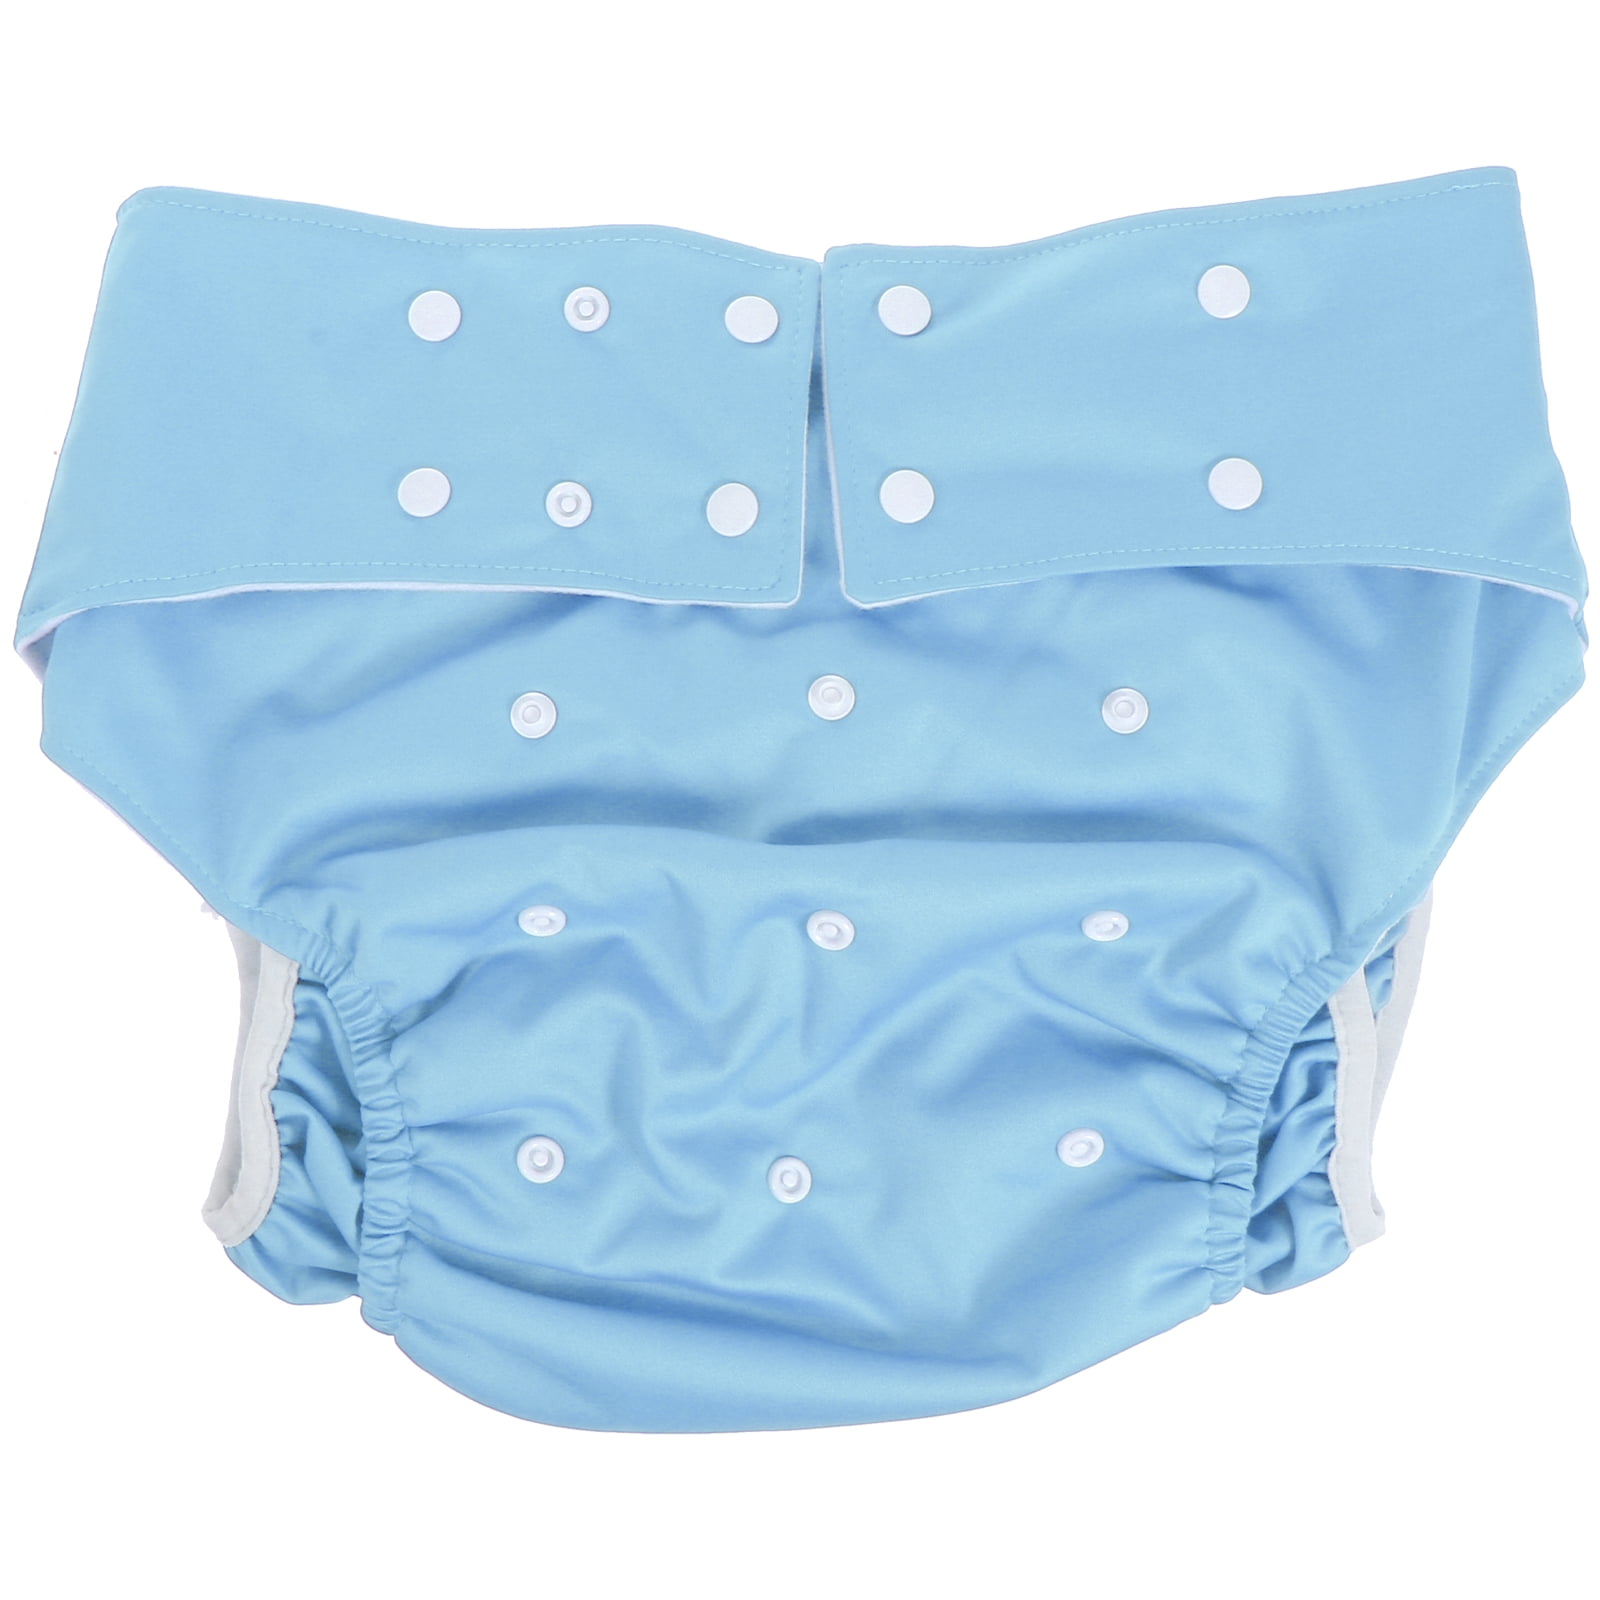 Adult Cloth Diaper Underwear/Swimwear, Reusable Washable and Waterproof  with Heavy Absorbency, for Incontinence: Pull-on Style Underpants –  DiurnetiX